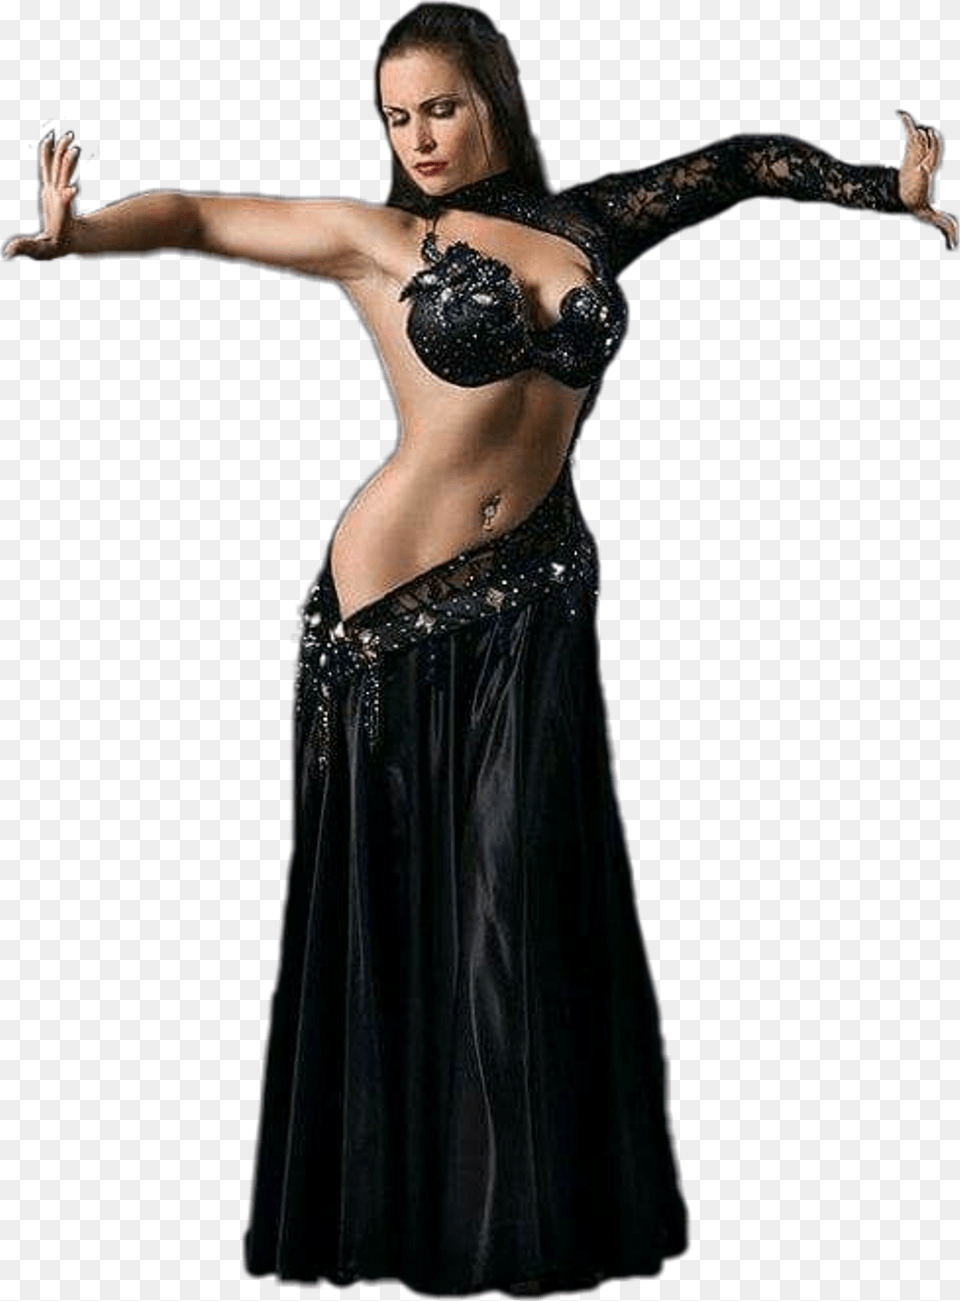 Report Abuse Belly Dance, Adult, Dancing, Female, Leisure Activities Png Image